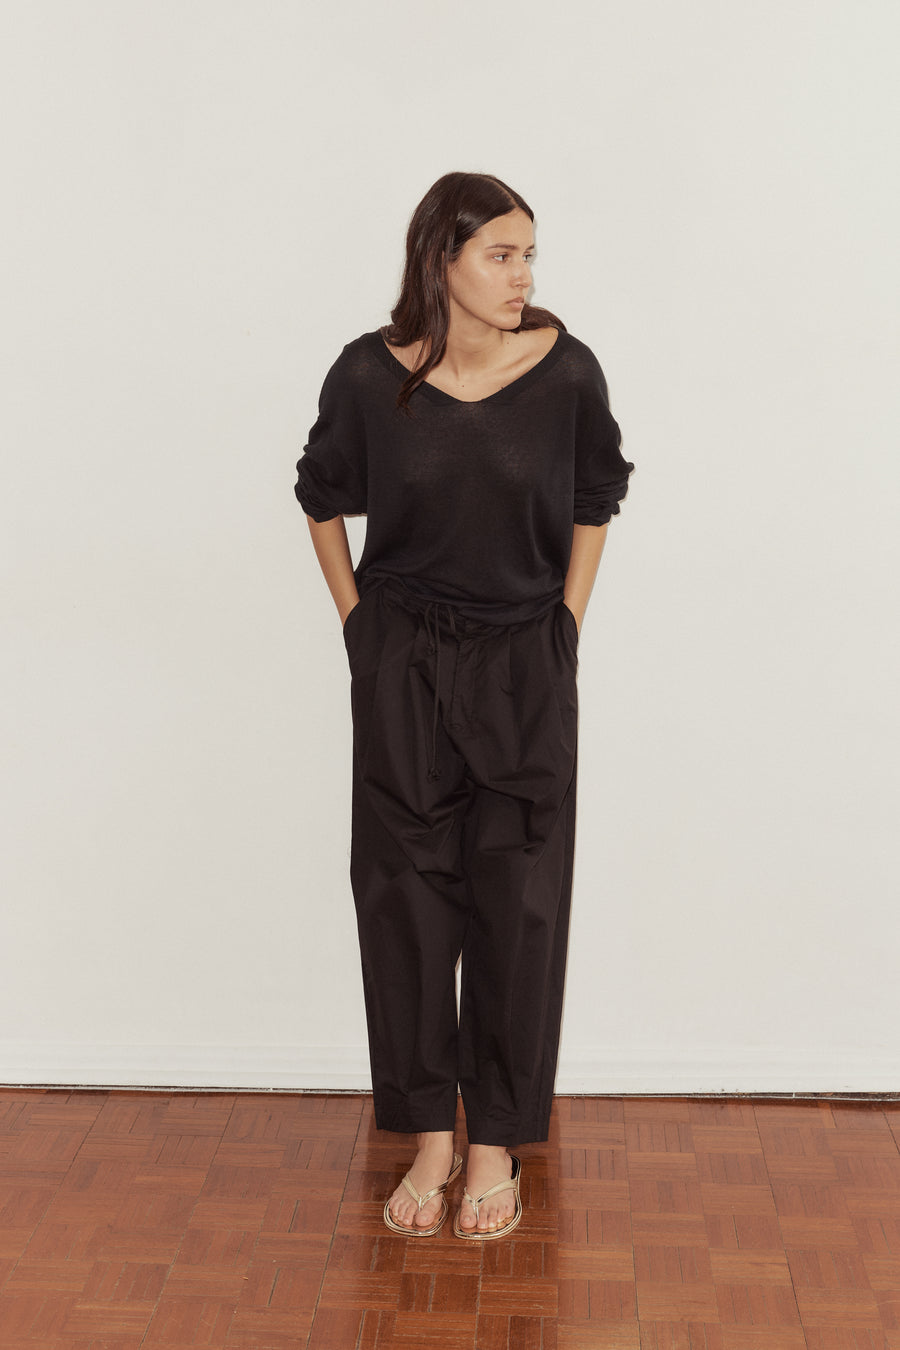 female model puts hands in pockets of the Deiji Studios Cotton Pant in black, a tailored trouser style pant with a relaxed leg. Styled with the Deiji Studios loose long sleeve knitted top in black.